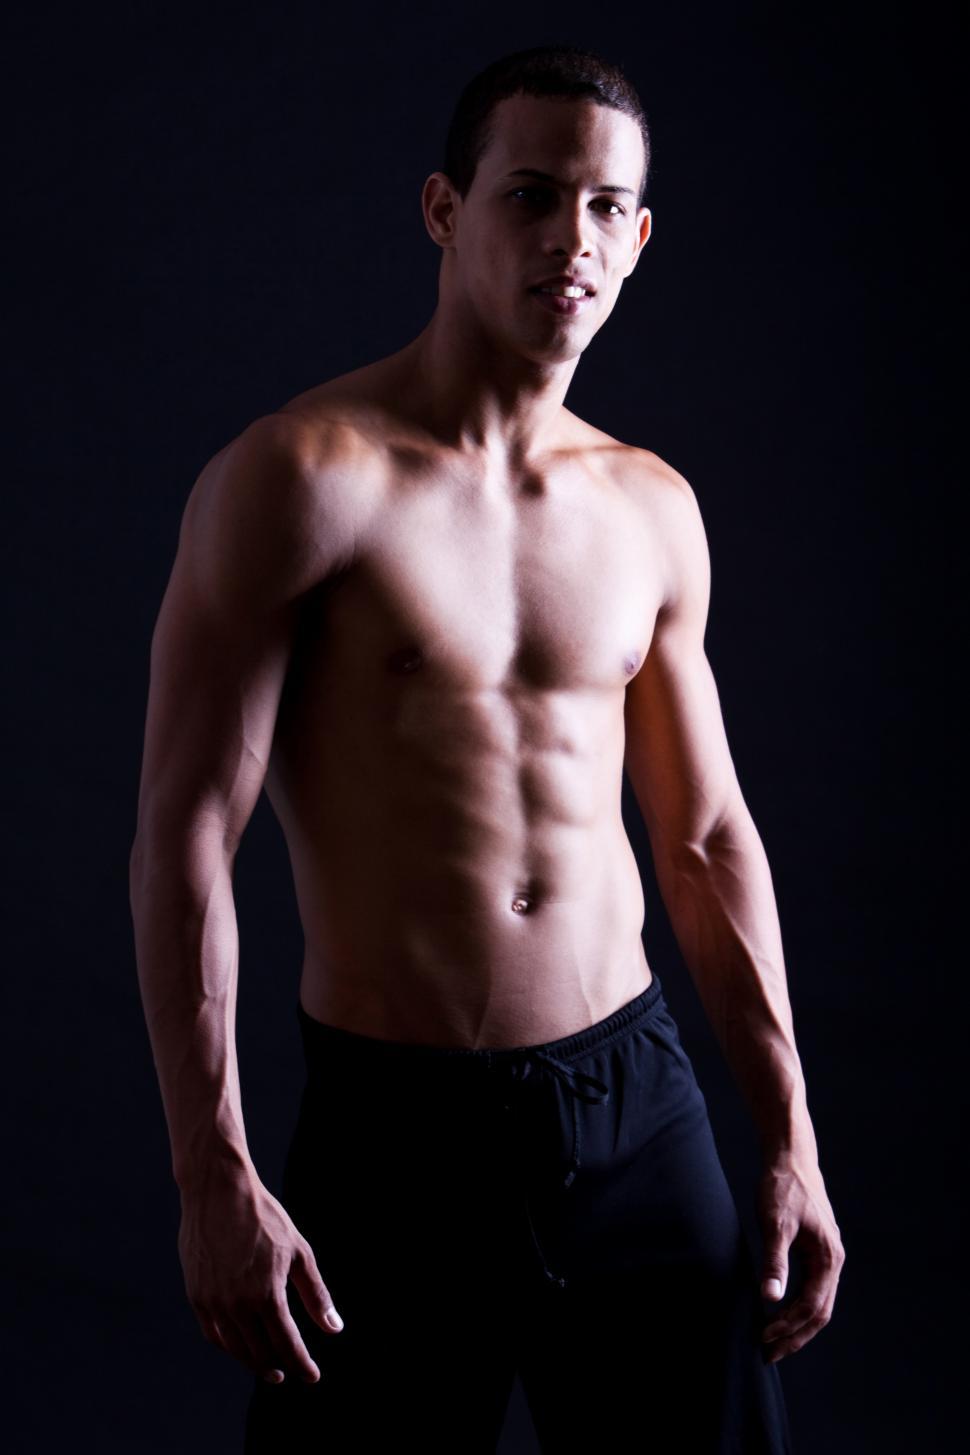 Man Fit Body. Closeup Sexy Fitness Male Body With Muscular Abs Stock Photo